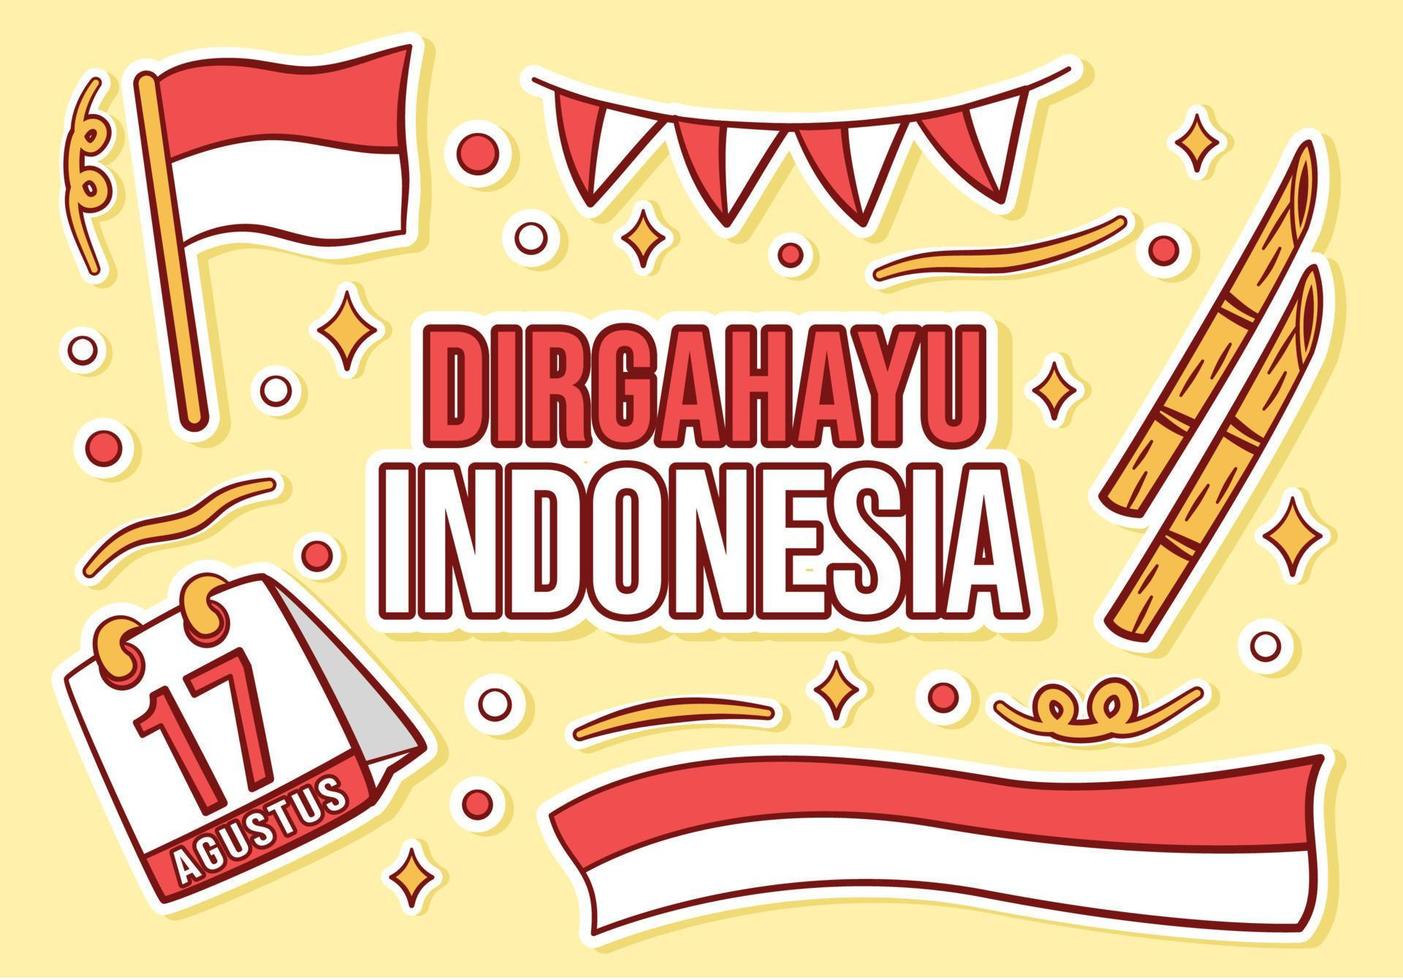 Cute sticker of Indonesia independence day cartoon illustration vector